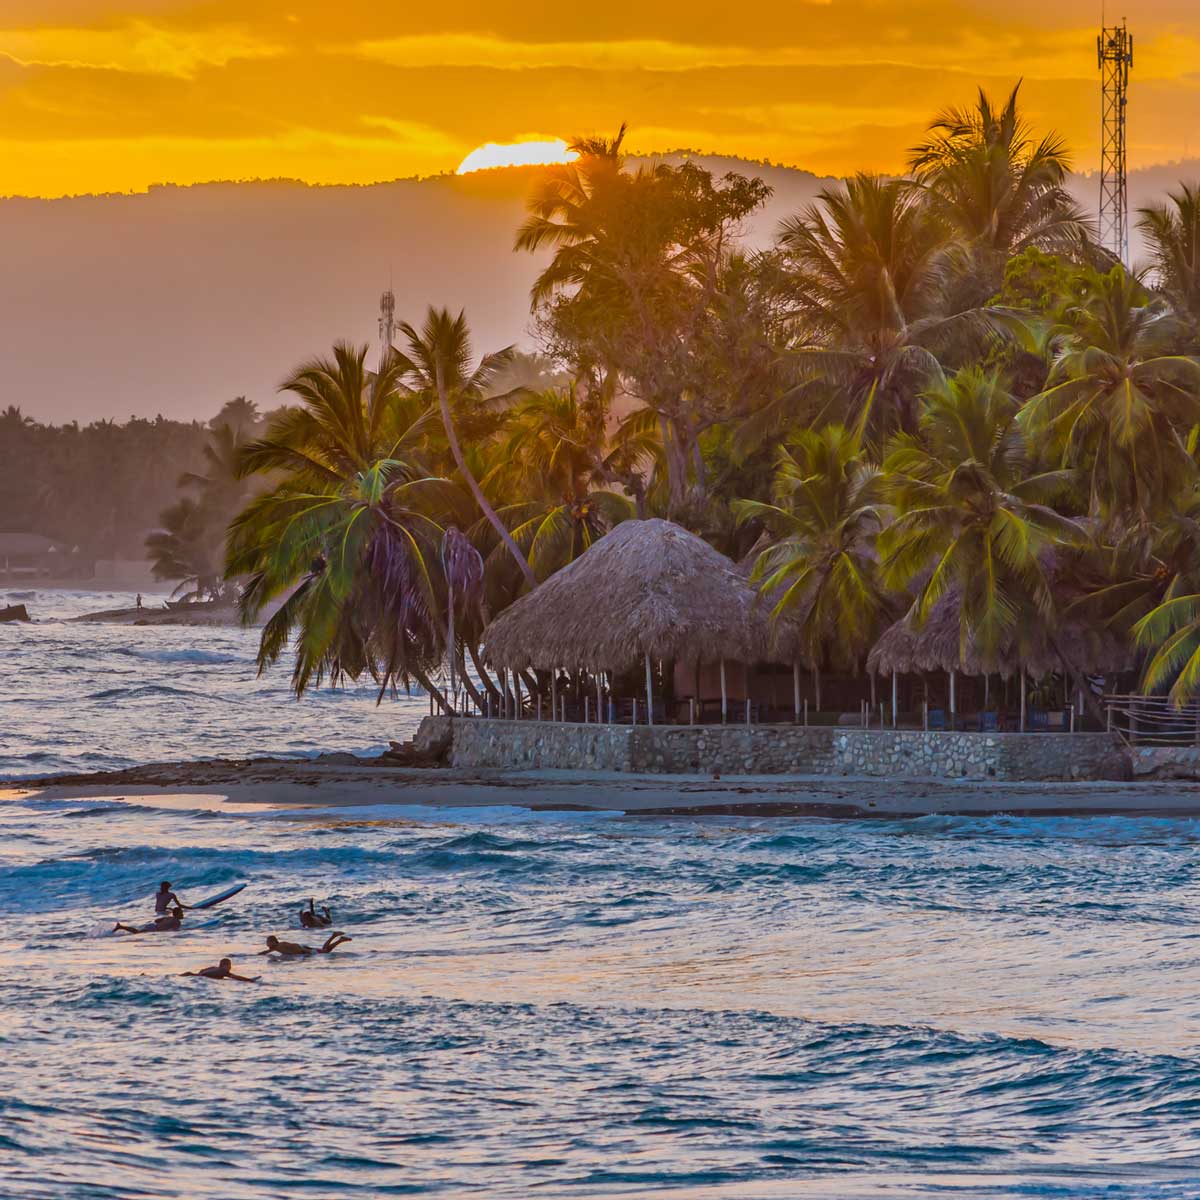 people surfing on a coast with palm trees and sun setting behind mountains